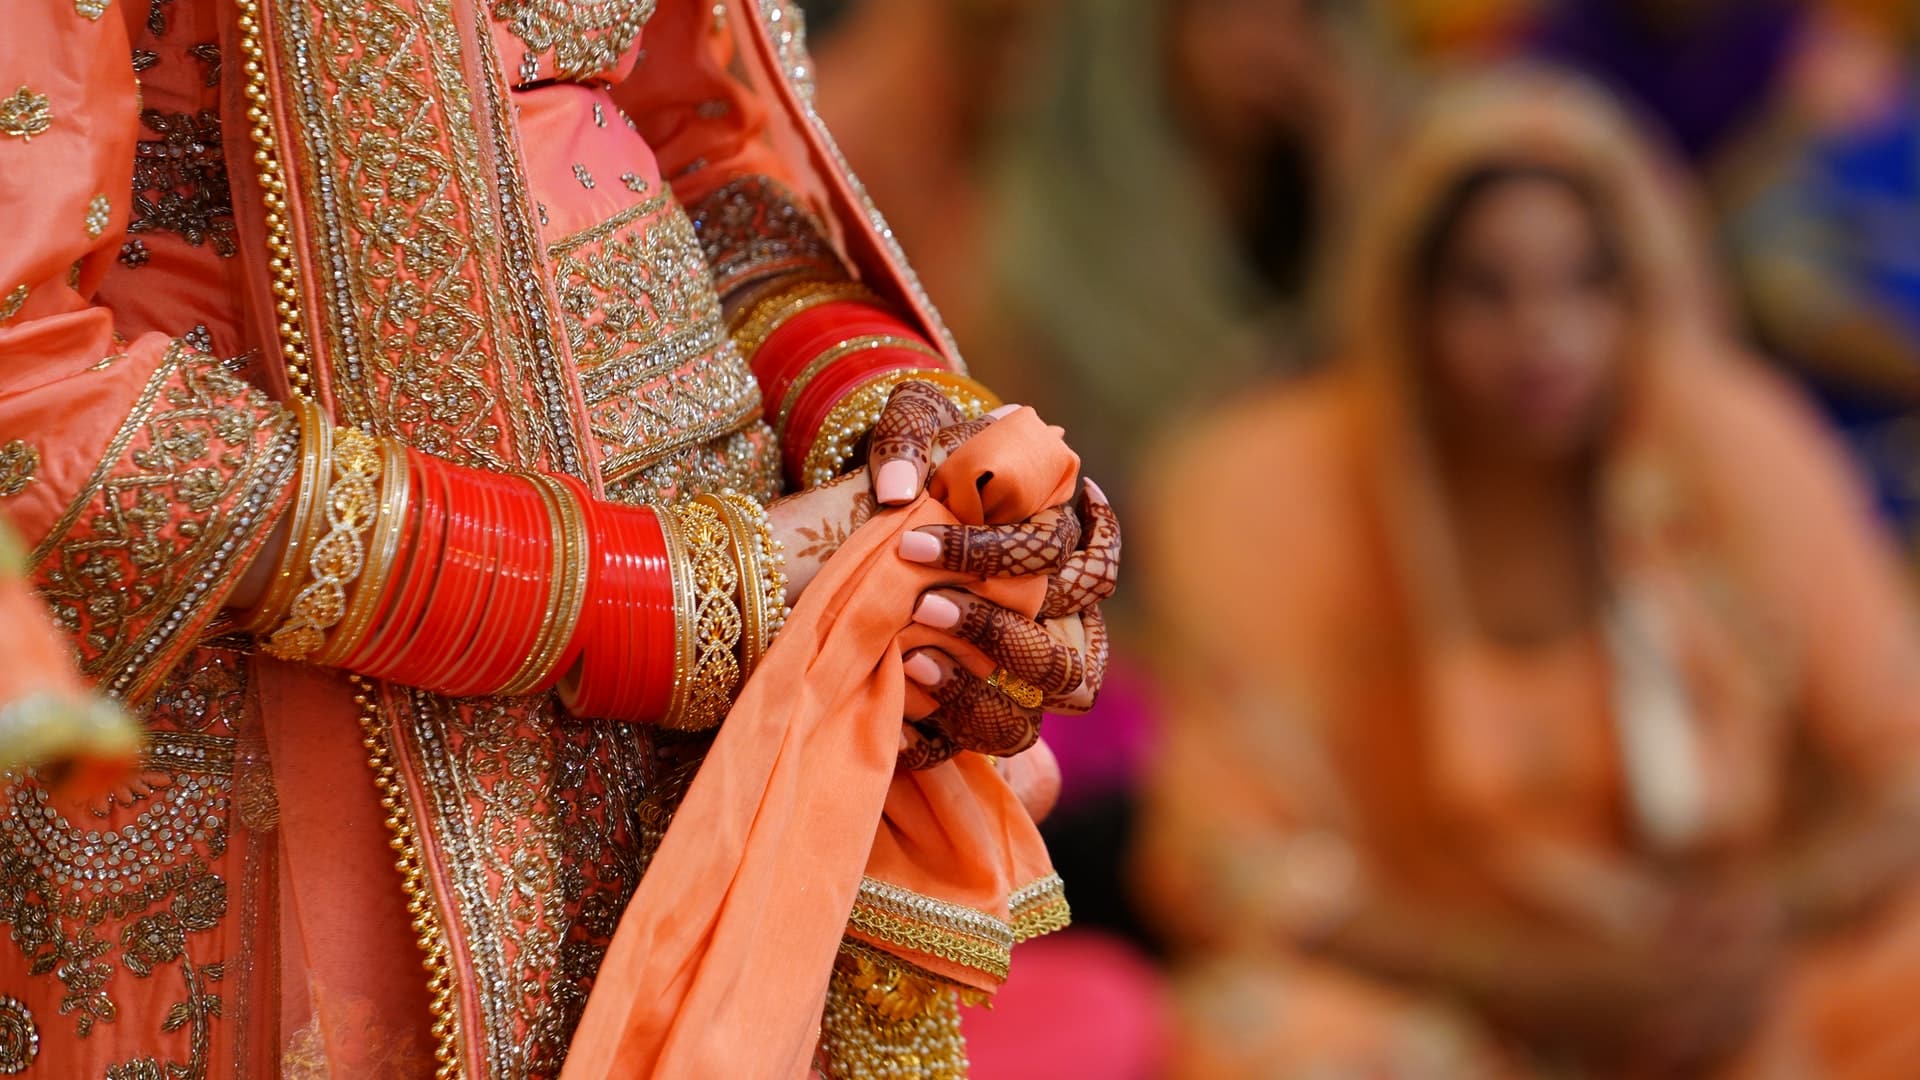 Odisha child rights group opposes proposal to raise marriage age for women to 21